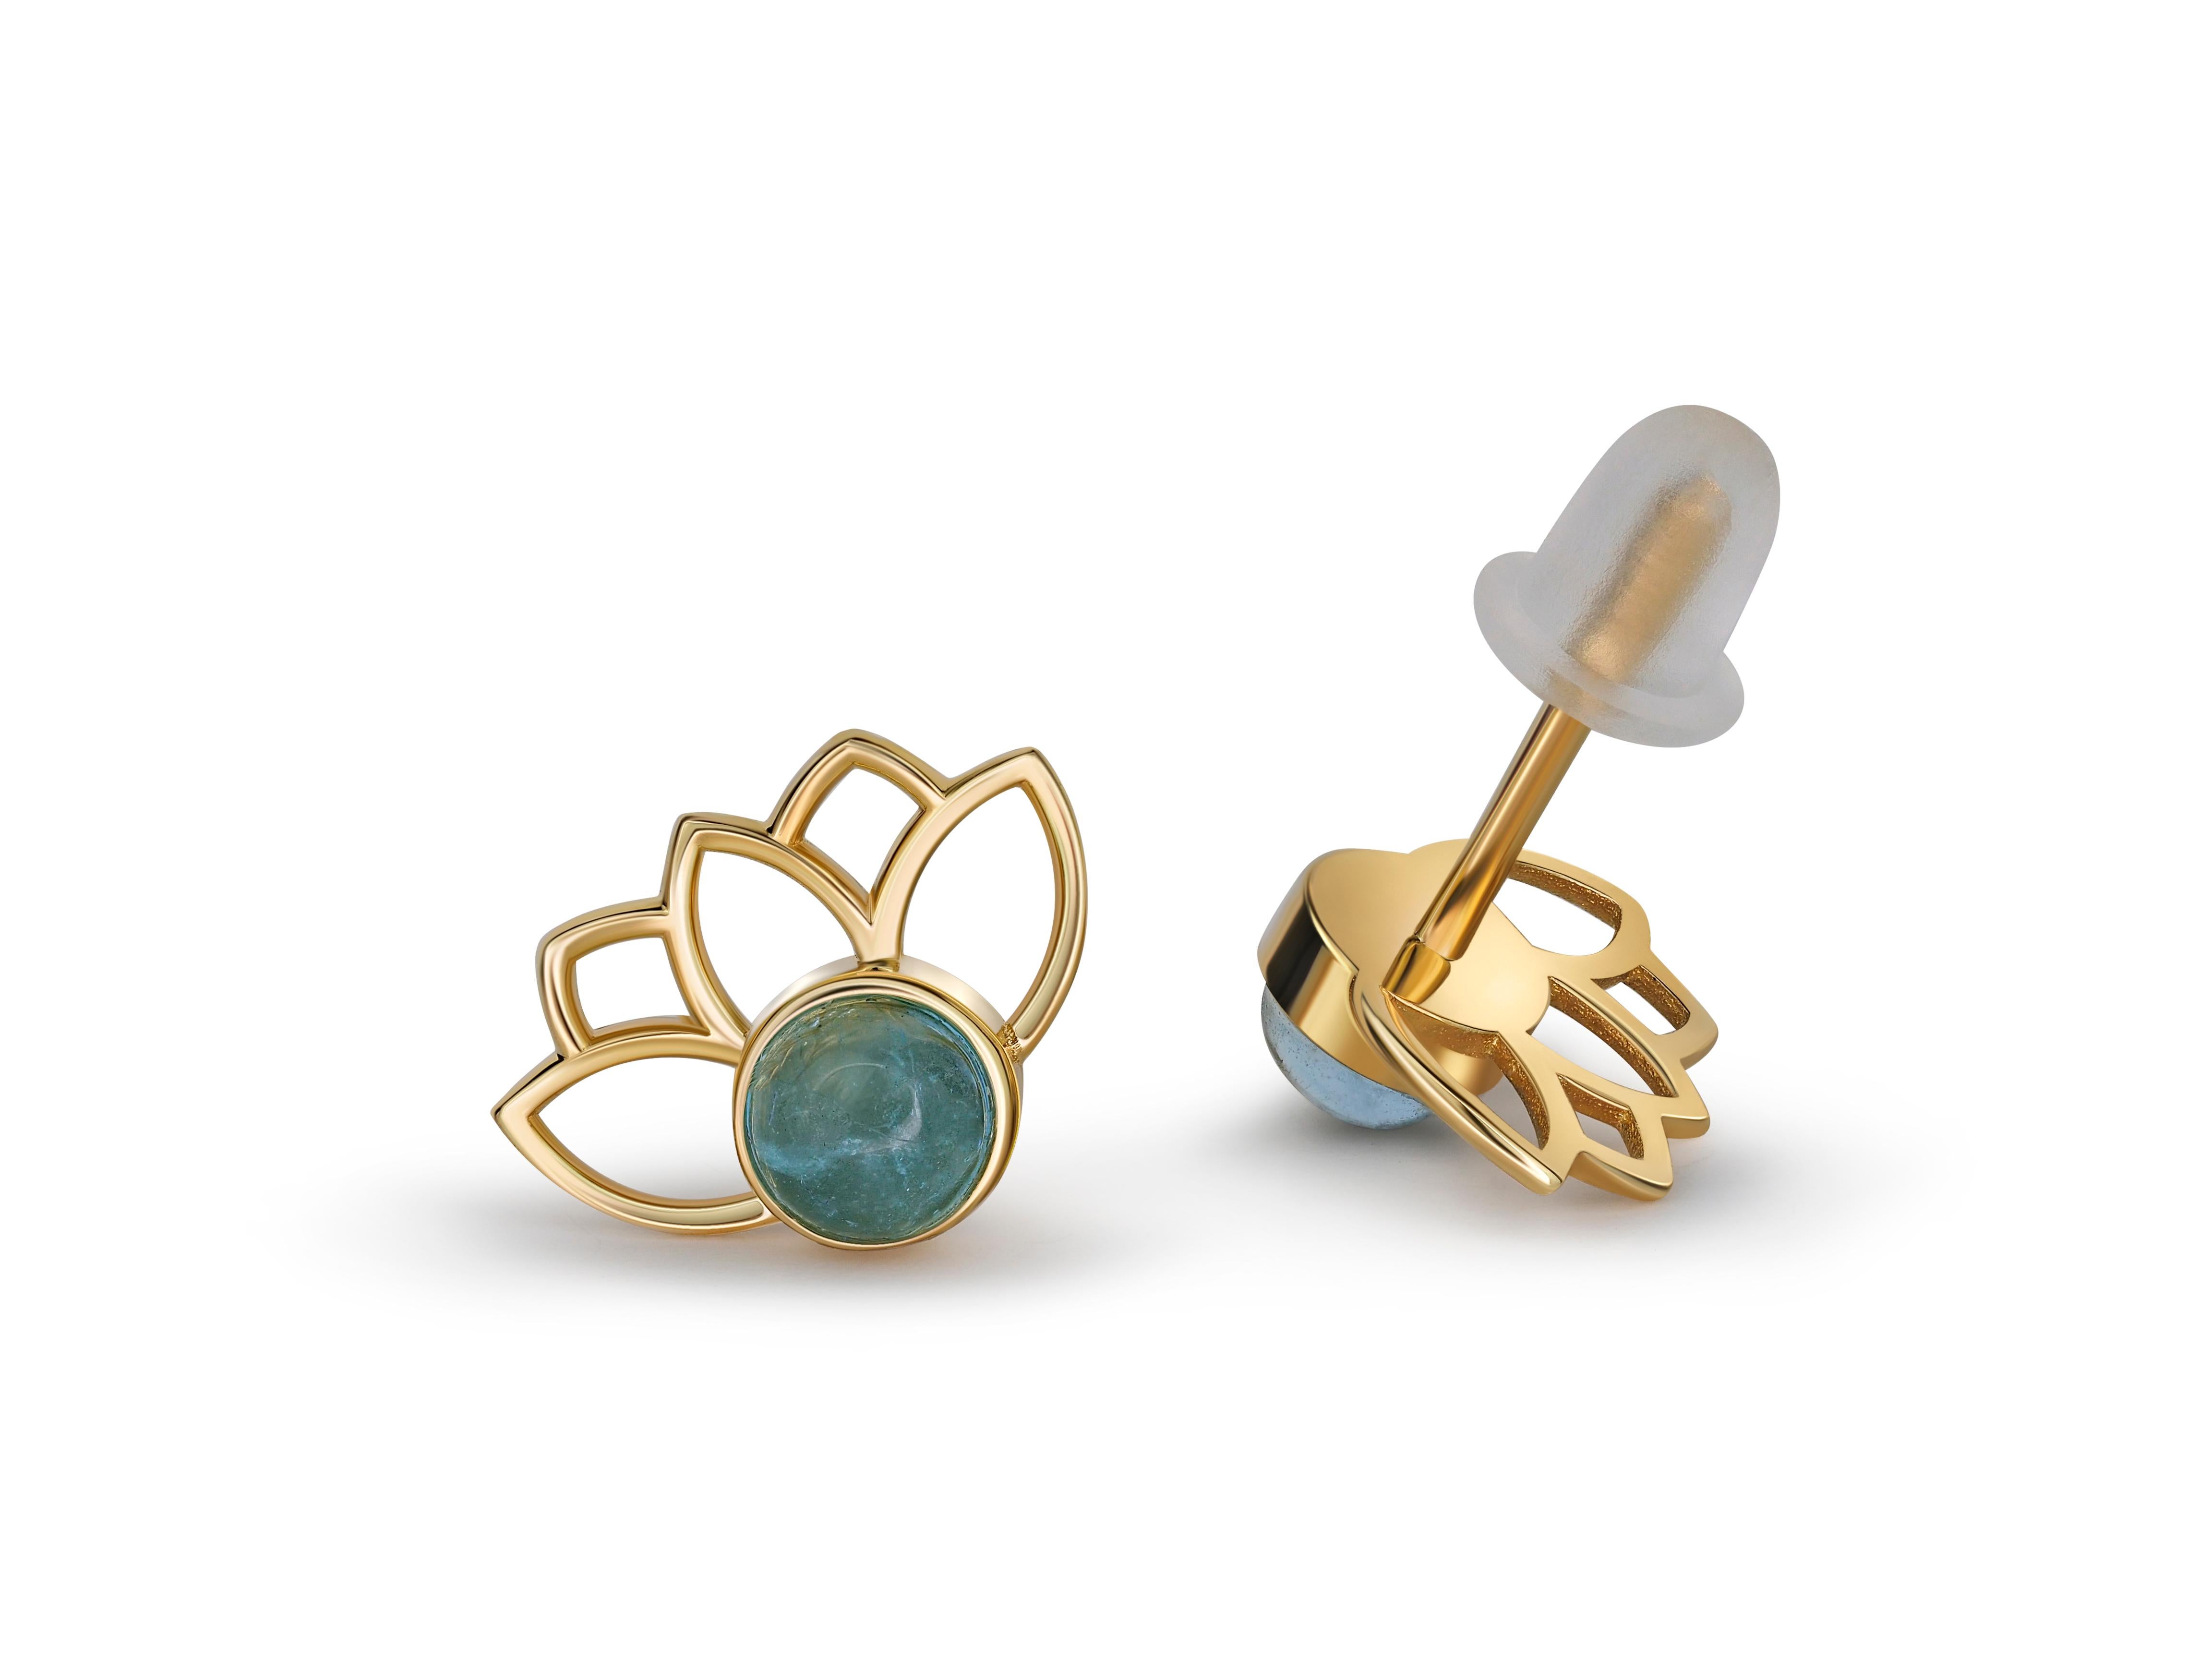 Modern Lotus Earrings Studs with Aquamarines in 14K Gold For Sale